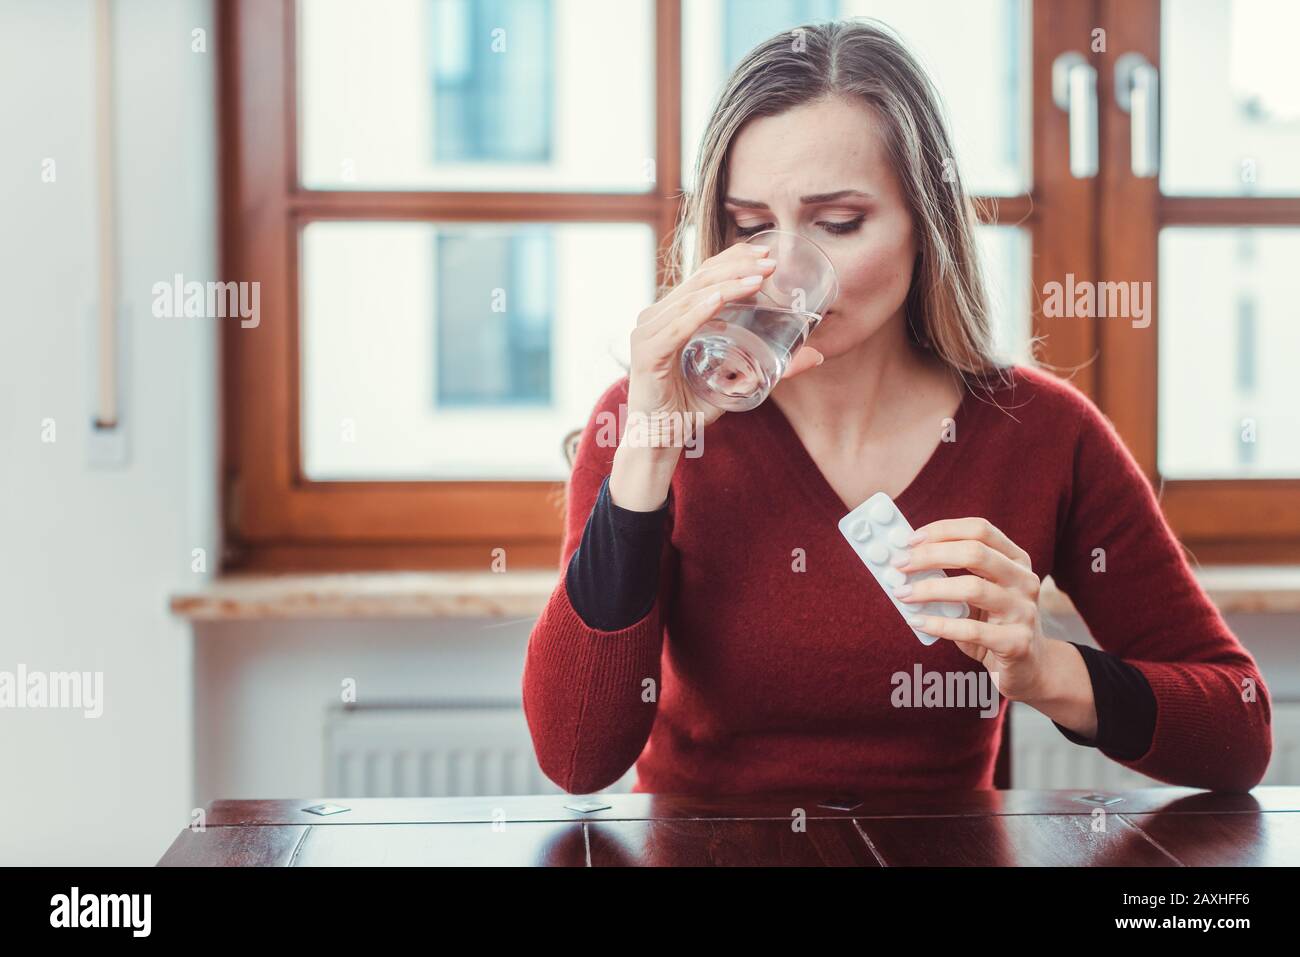 Woman feeling sick or unwell and taking medication Stock Photo